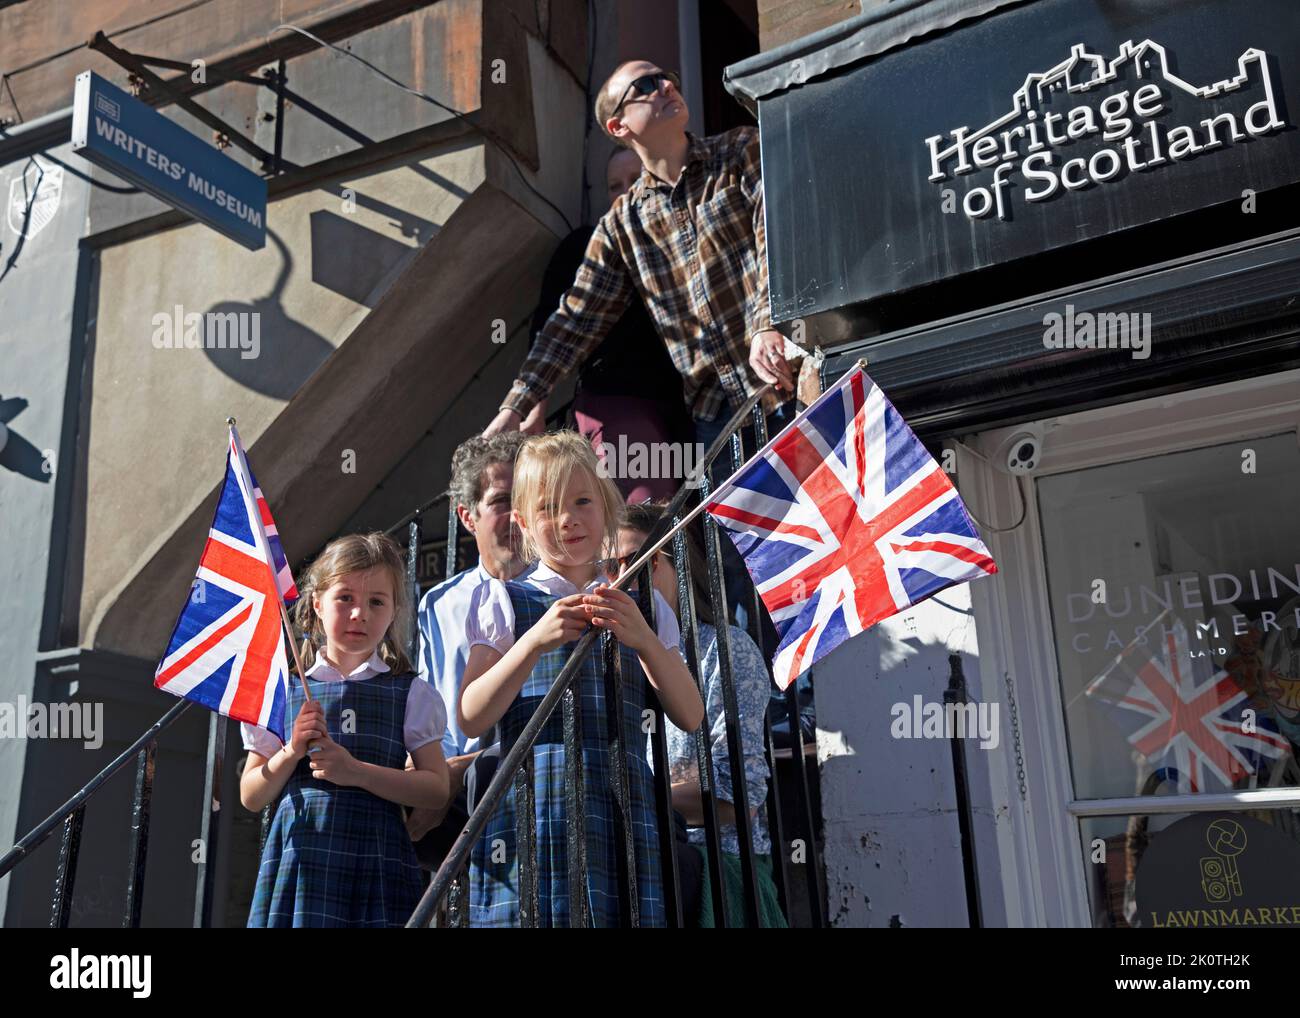 Royal Mile, Edinburgh, Scotland, UK. Crowds gather for Coffin of Her Majesty Queen Elizabeth II departing St Giles Cathedral.13th September 2022. Pictured: This family from Stirling wait on steps for the coffin to pass. Credit: Arch White/alamy live news. Stock Photo